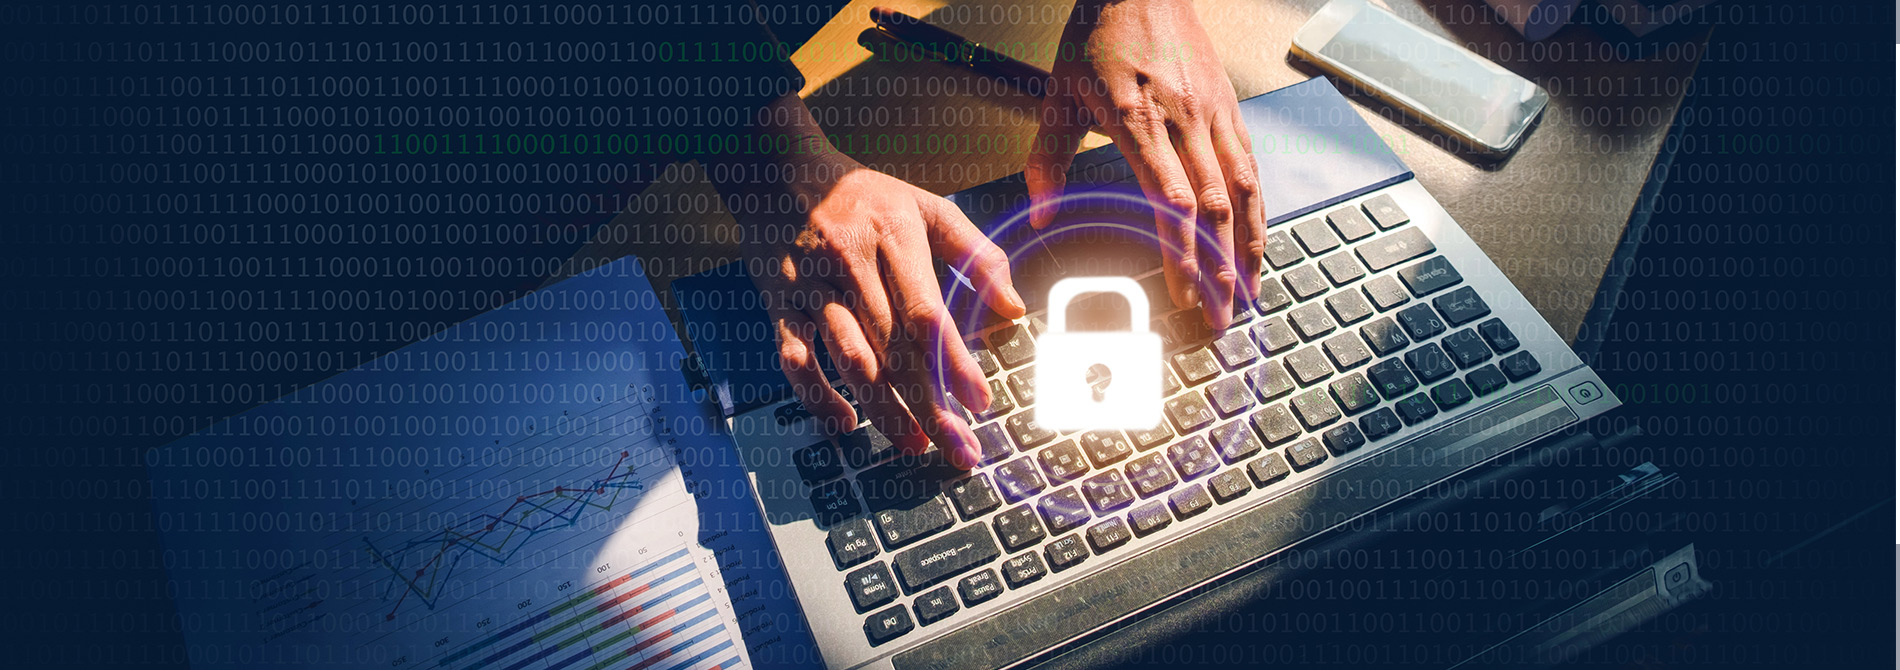 Smarter online security starts with these 4 tips